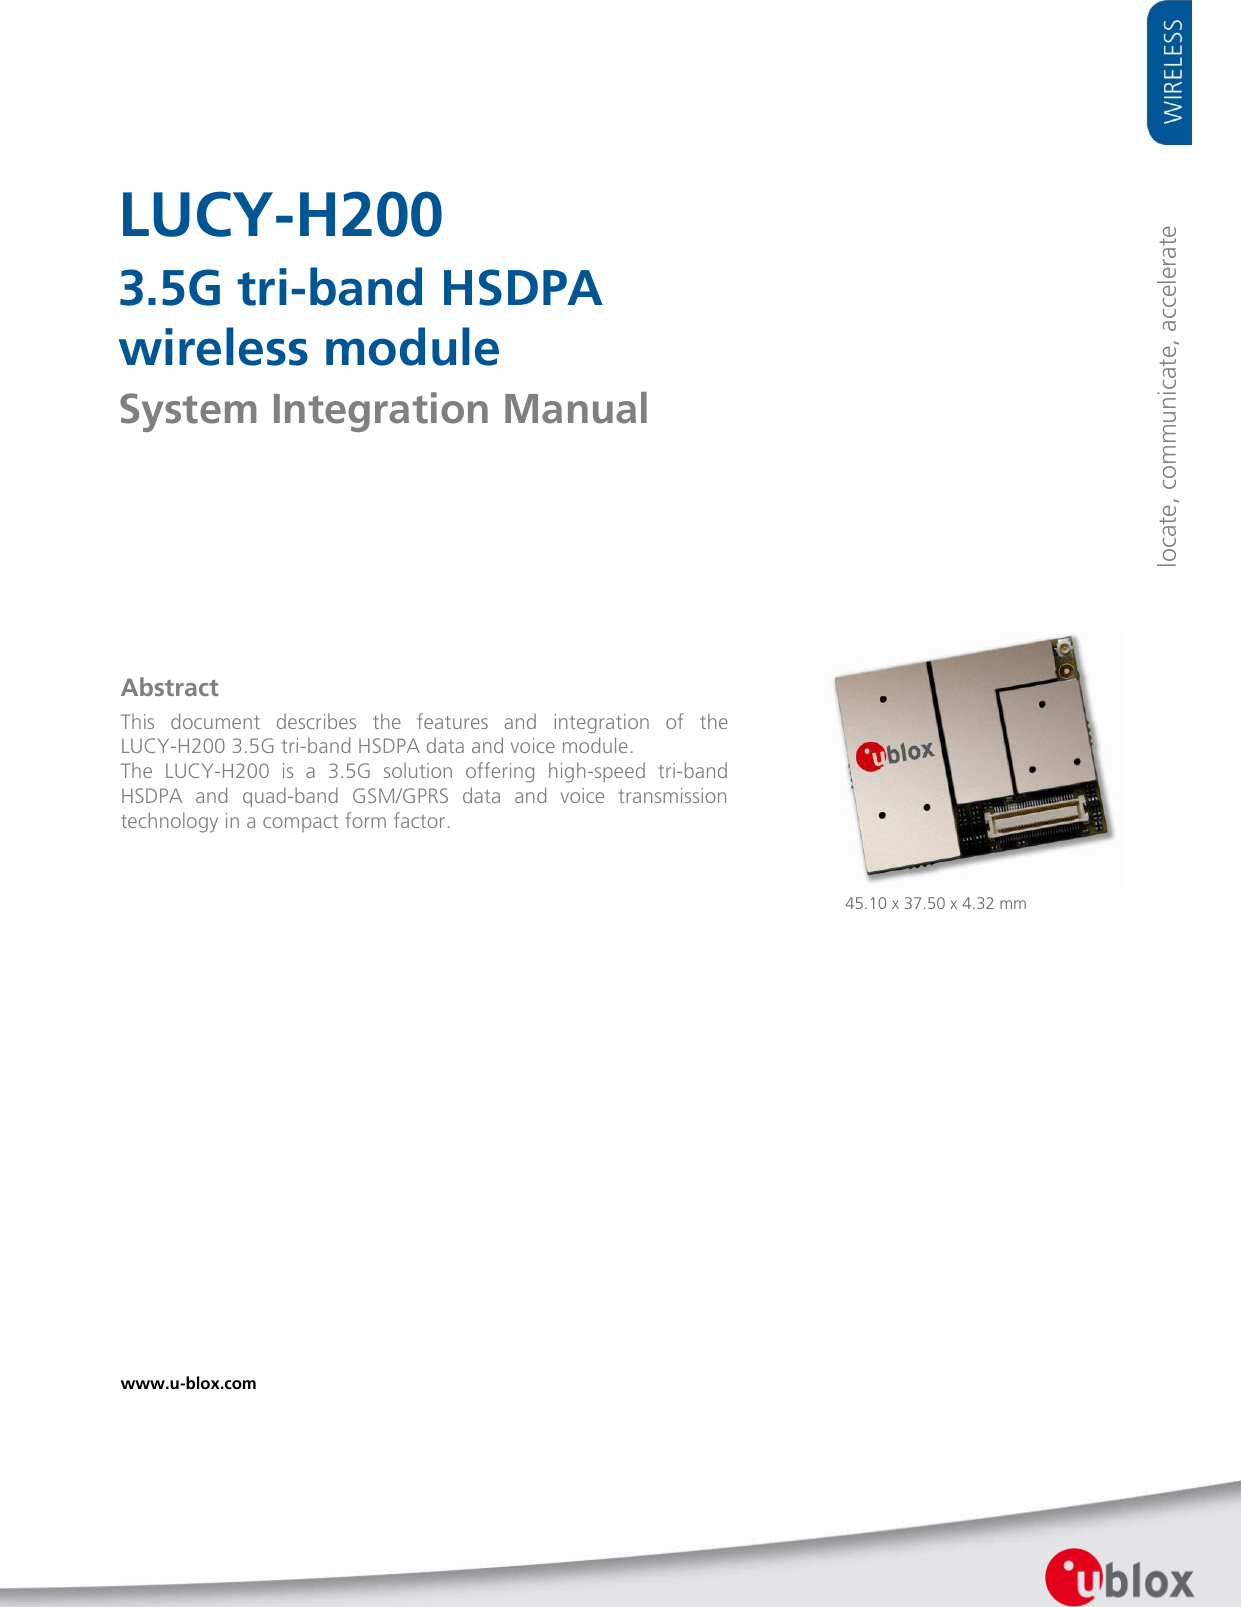     LUCY-H200 3.5G tri-band HSDPA  wireless module System Integration Manual                Abstract This  document  describes  the  features  and  integration  of  the LUCY-H200 3.5G tri-band HSDPA data and voice module. The  LUCY-H200  is  a  3.5G  solution  offering  high-speed  tri-band HSDPA  and  quad-band  GSM/GPRS  data  and  voice  transmission technology in a compact form factor.  locate, communicate, accelerate 45.10 x 37.50 x 4.32 mm www.u-blox.com   